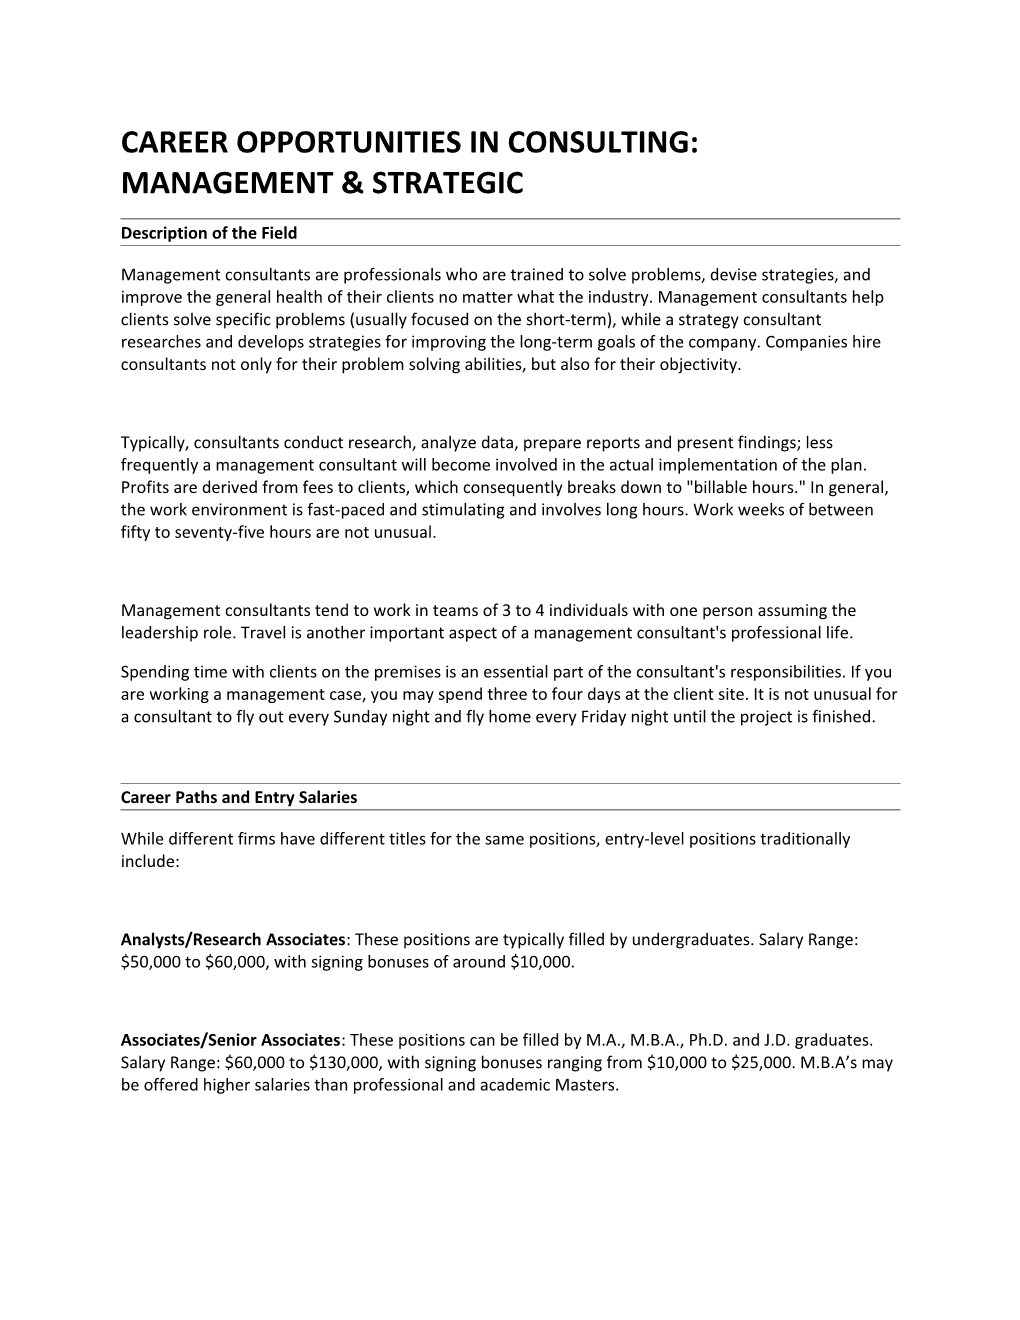 Career Opportunities in Consulting: Management & Strategic